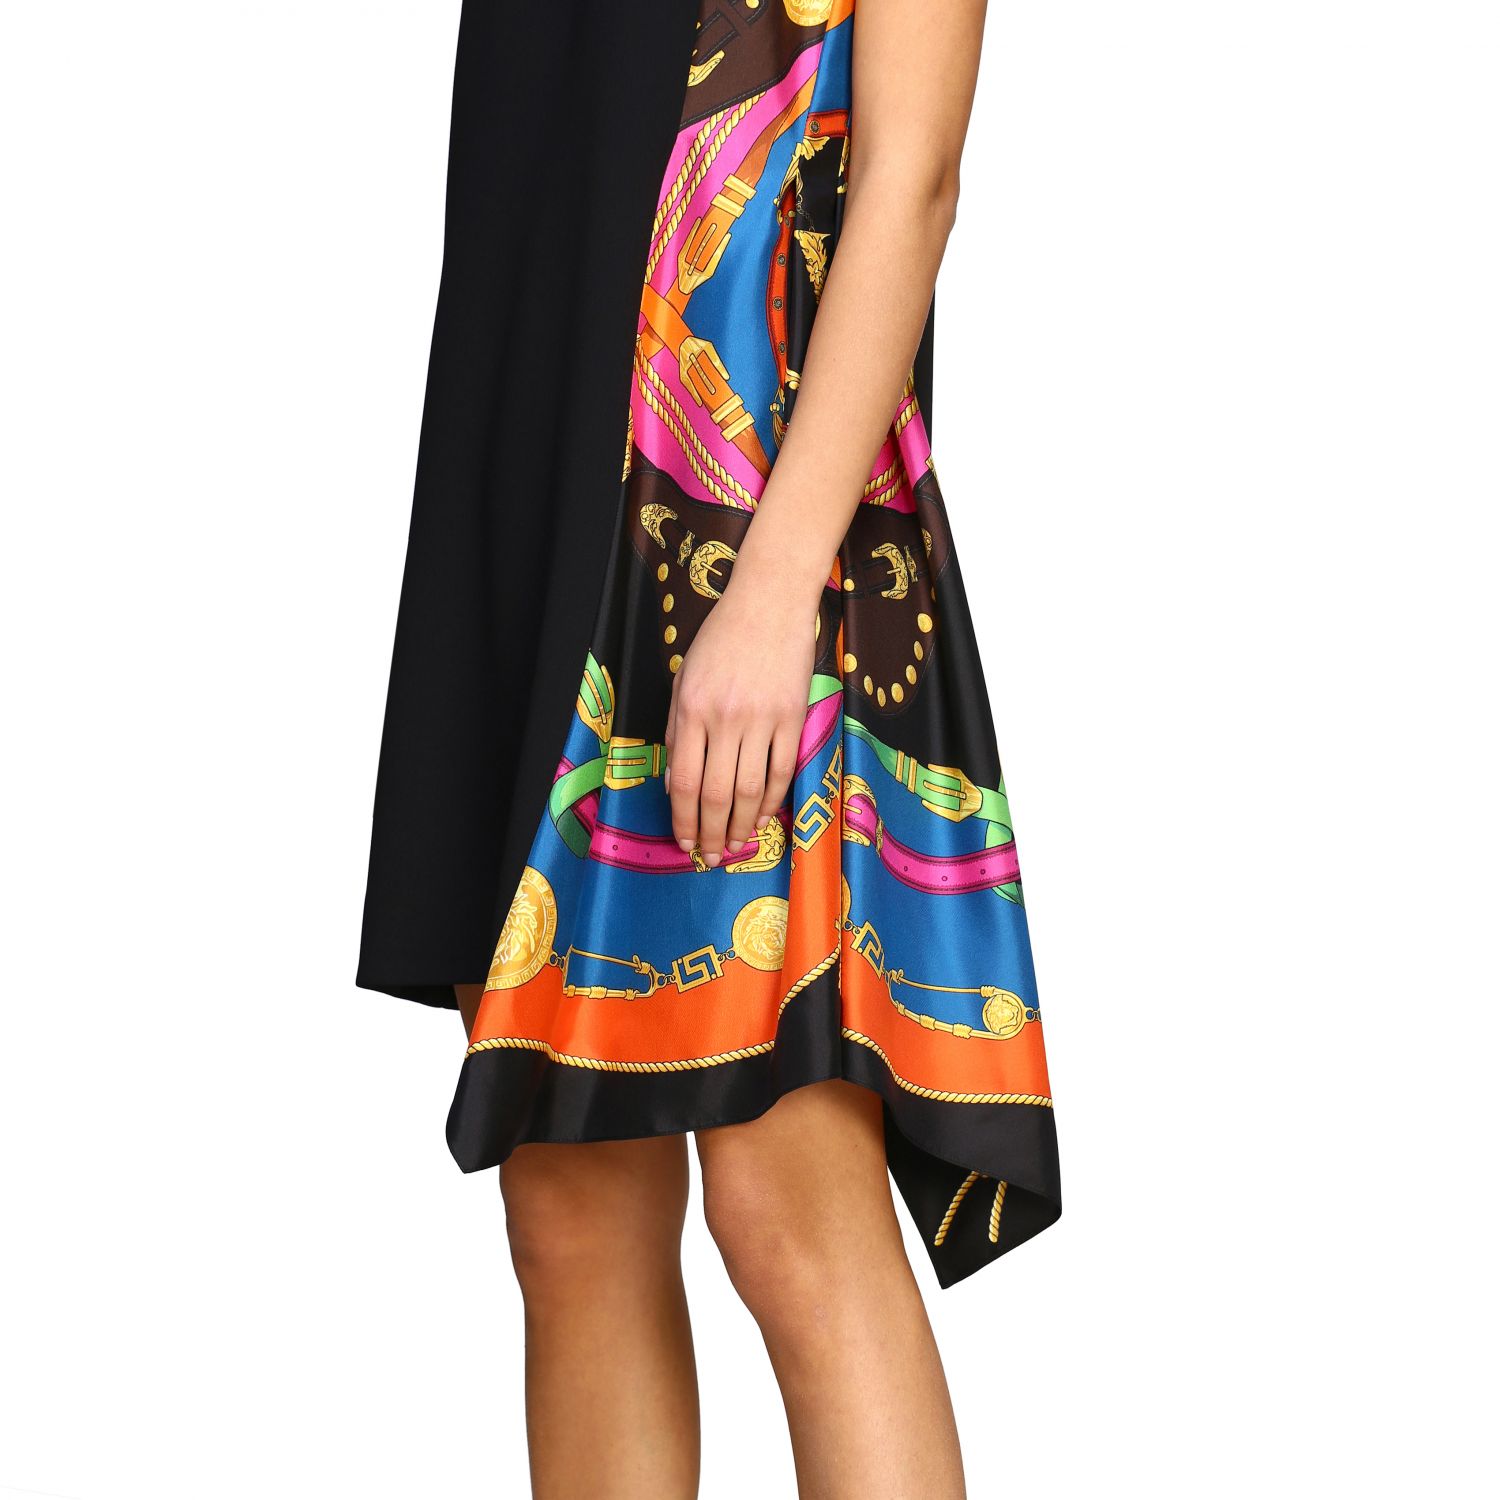 Buy > versace colorful dress > in stock